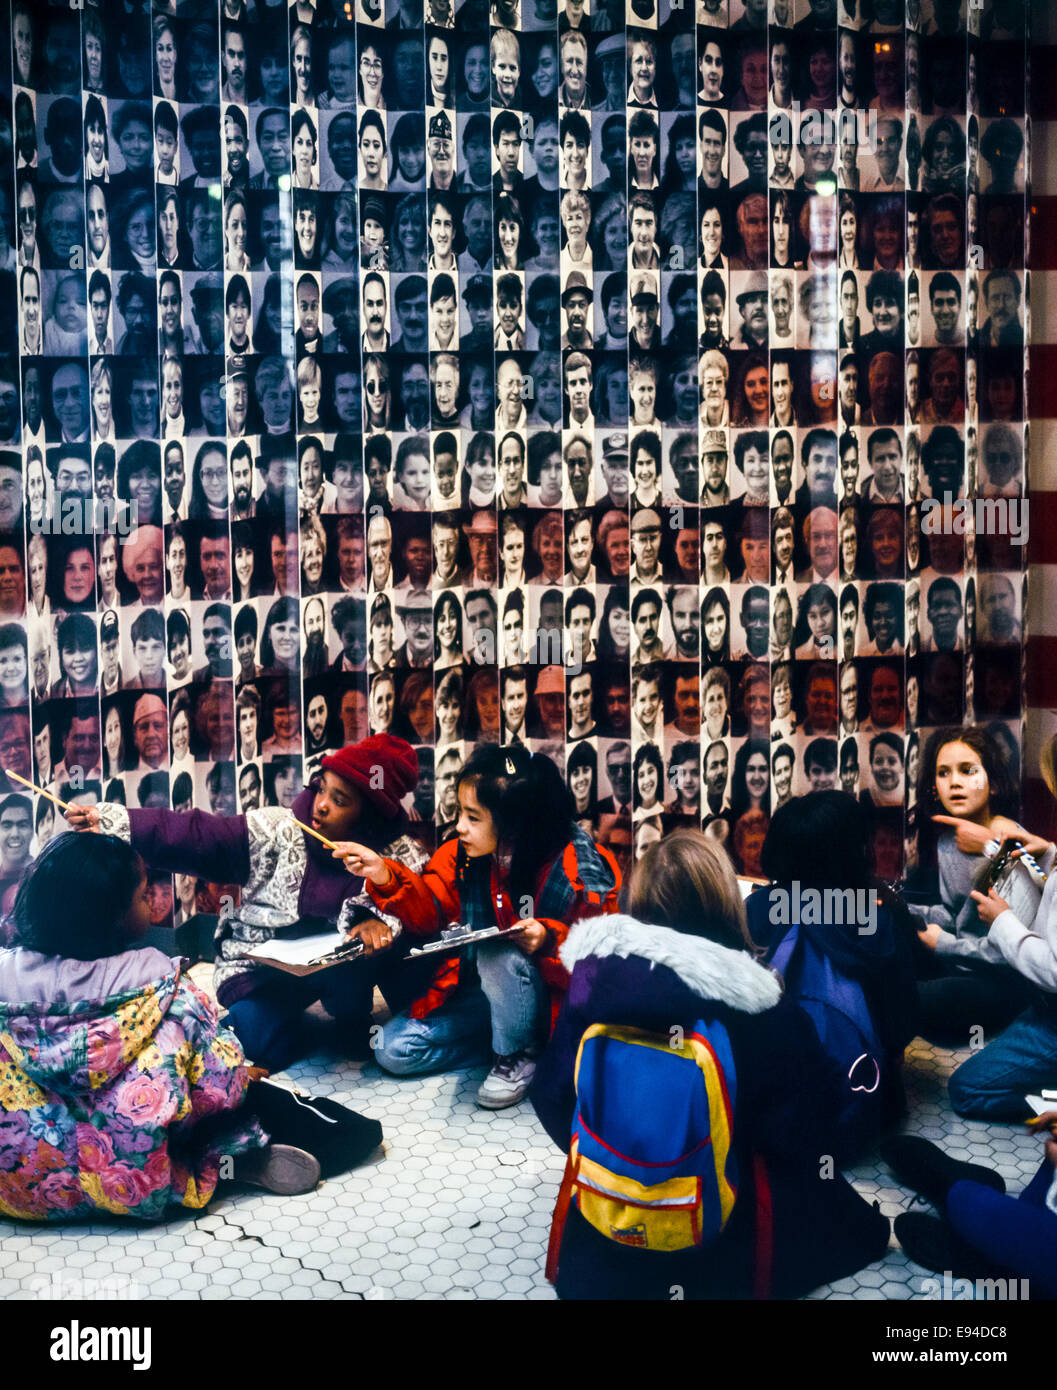 Schoolchildren visiting Ellis Island Immigration Museum, sitting in front of flag of faces, New York, NY, USA Stock Photo